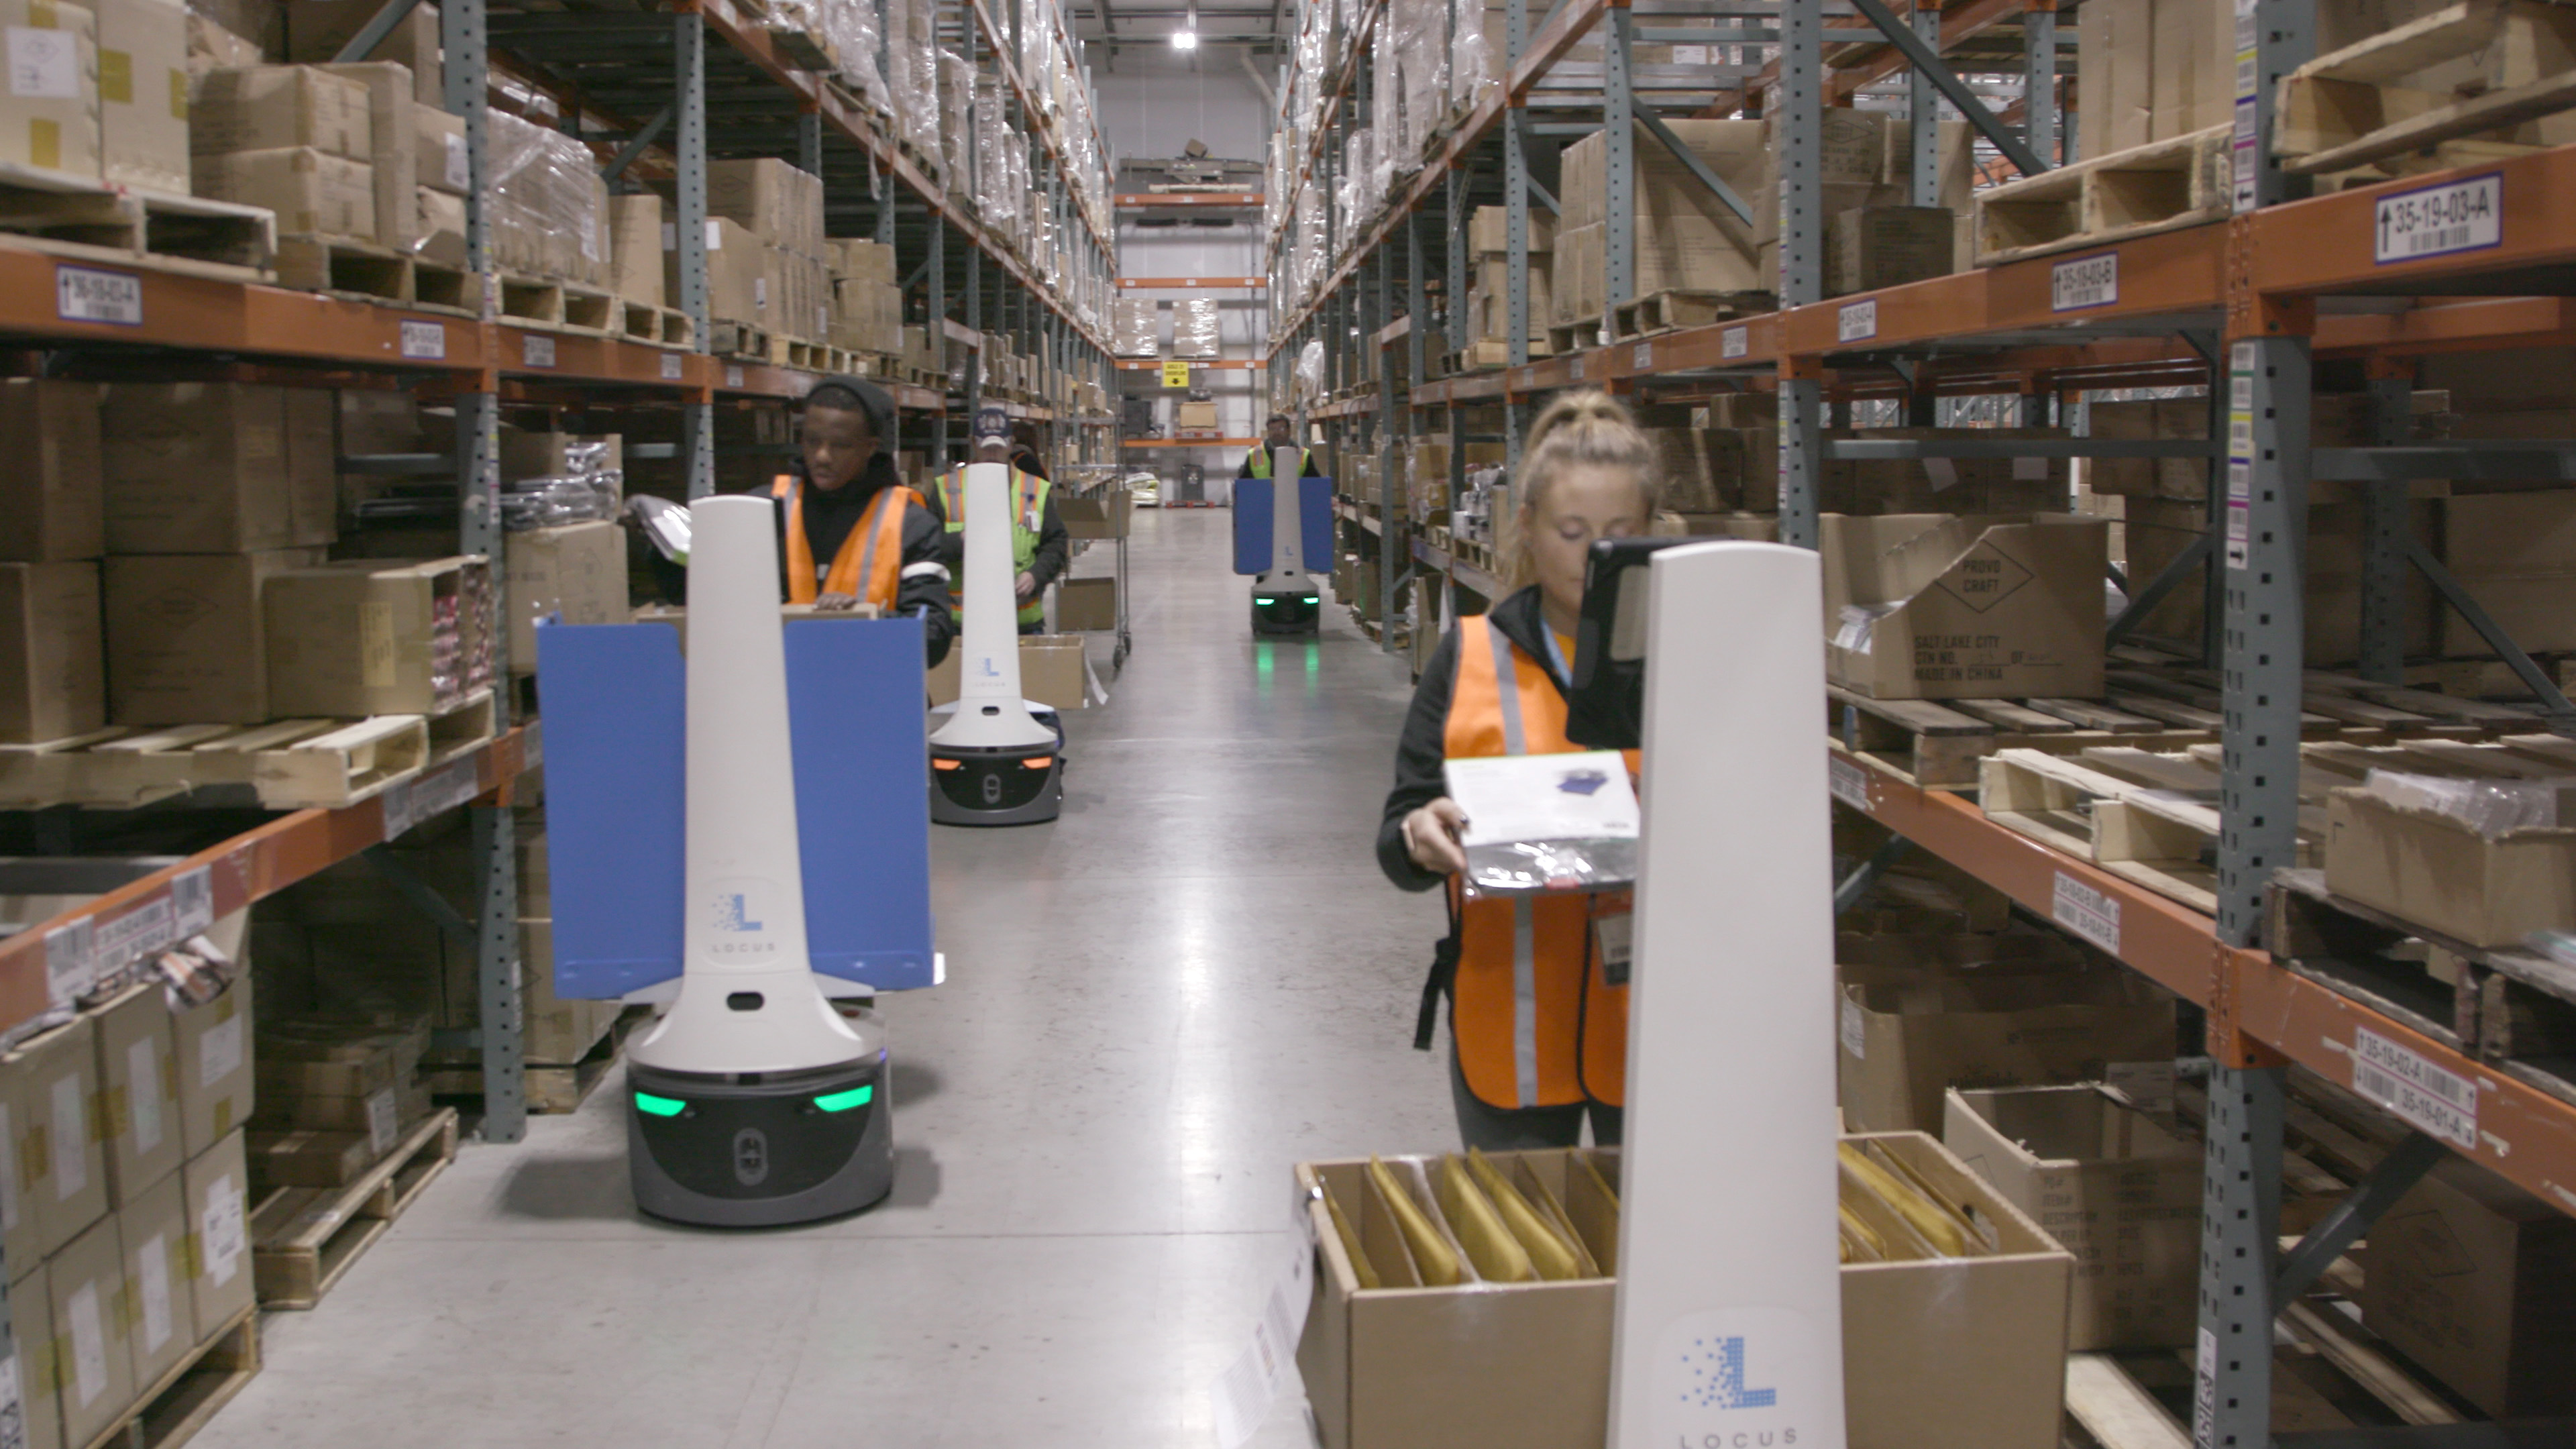 The Amazon effect is fueling a wave of robotics investments, acquisitions and maybe an IPO